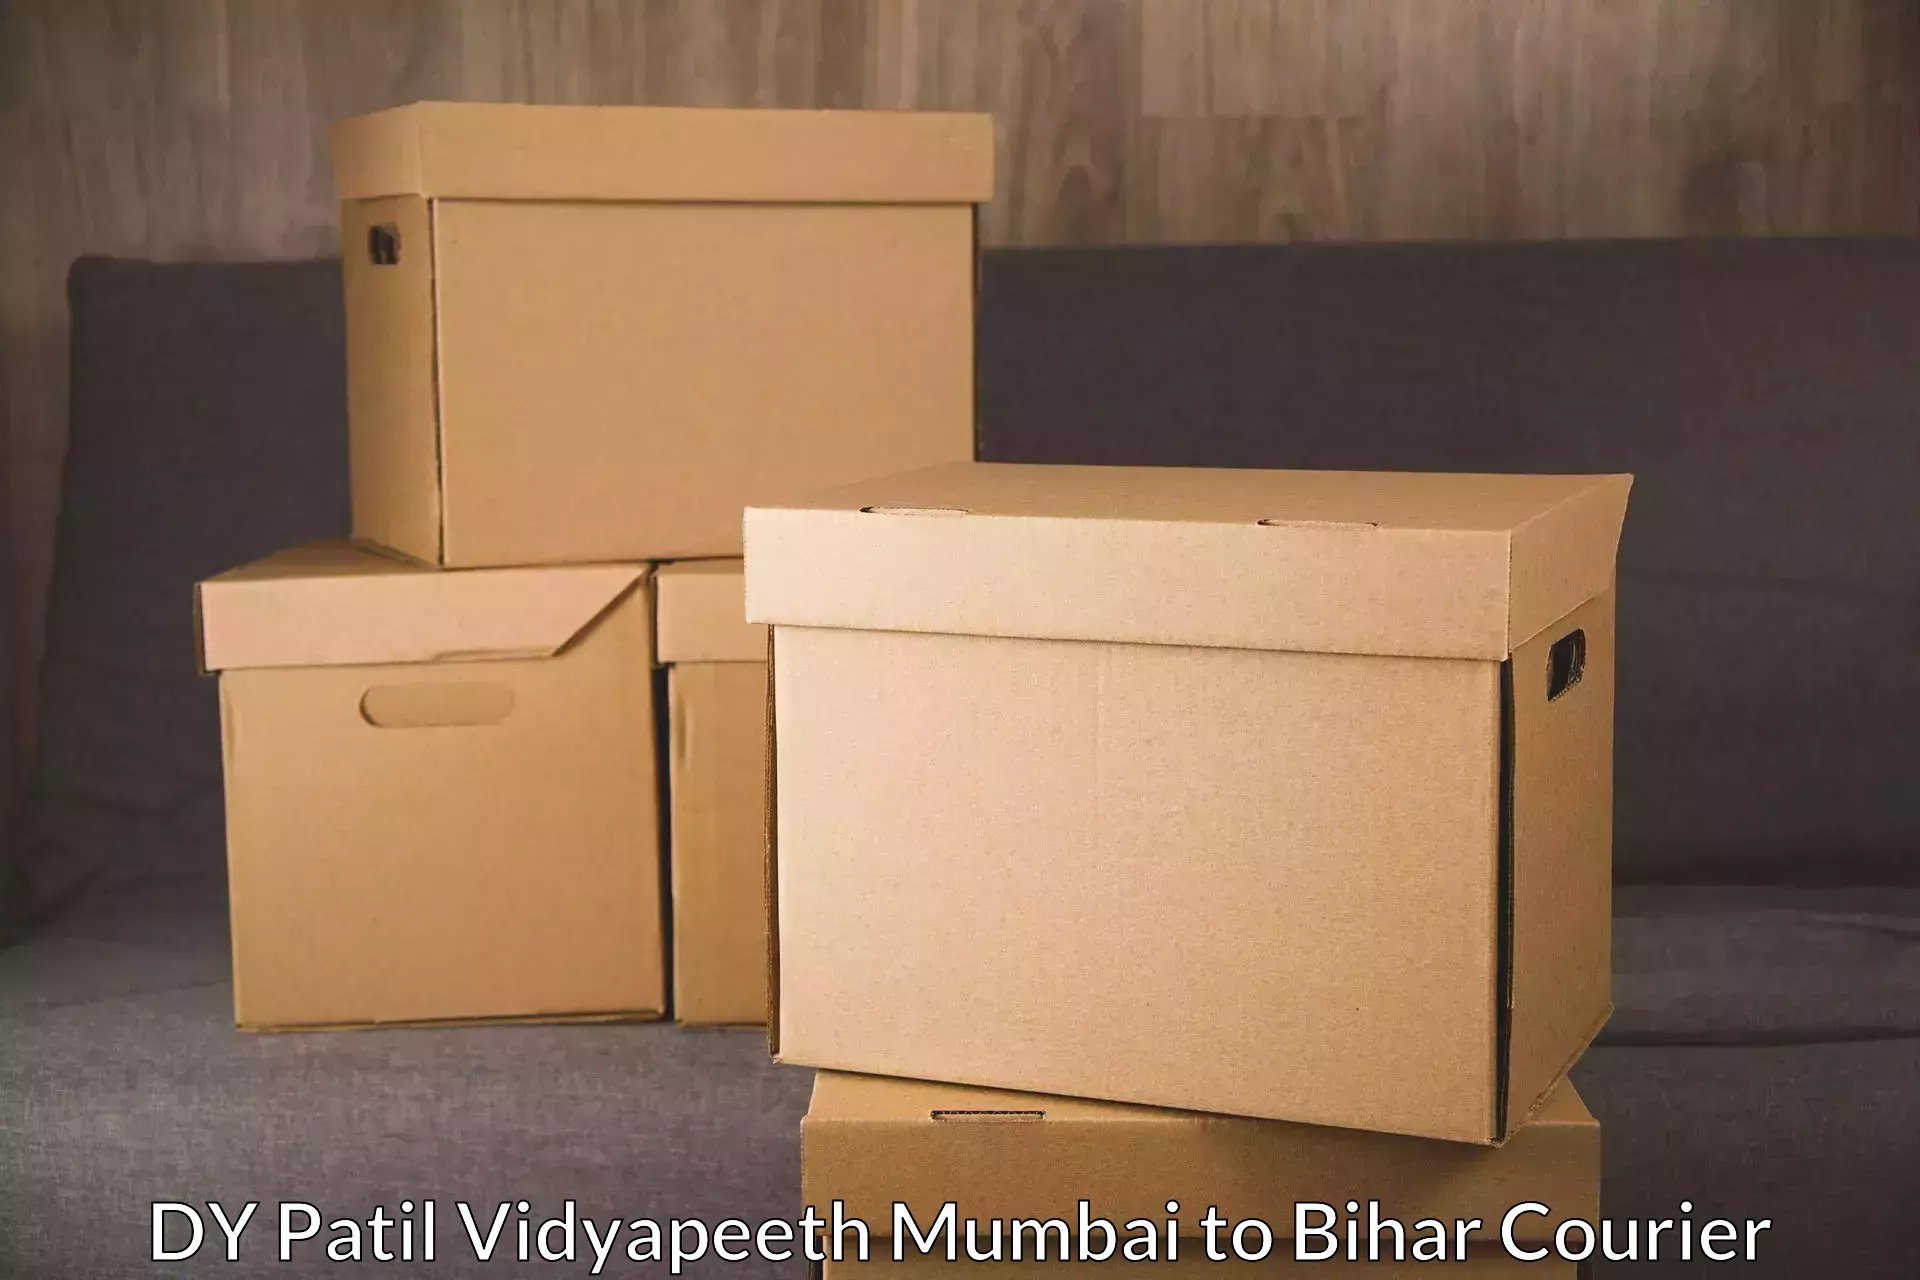 Small business couriers DY Patil Vidyapeeth Mumbai to Rajpur